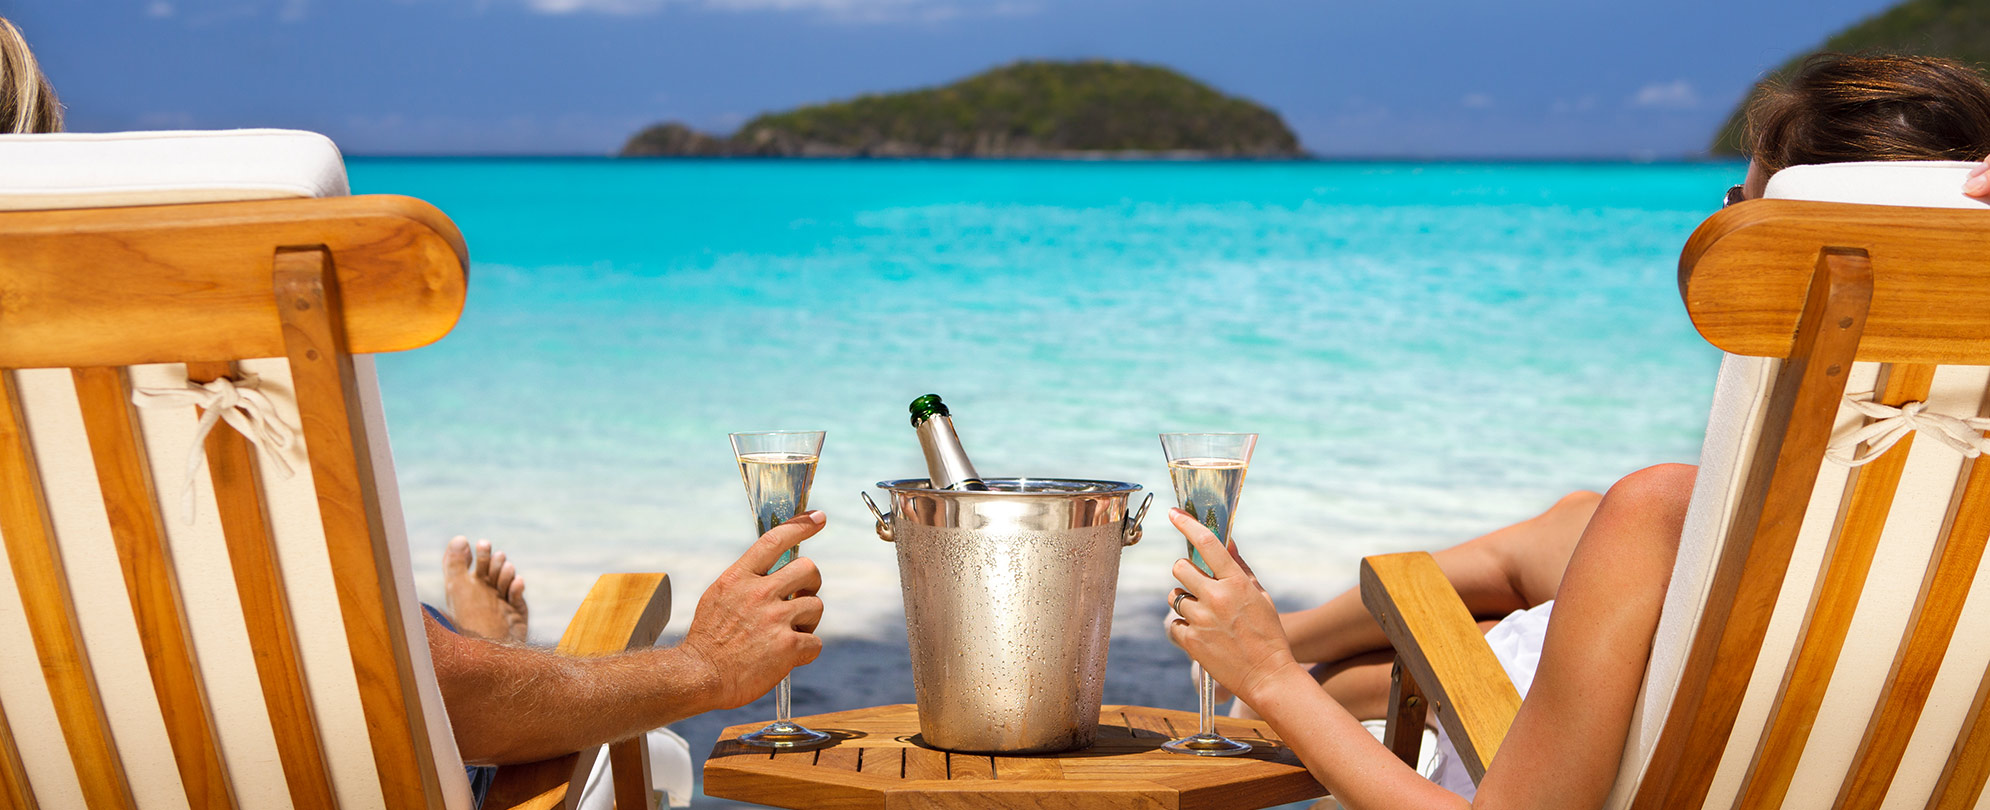 View of a man and a woman from behind as they lounge in beach chairs with a bottle on ice between them and each holding a glass of champagne as they look out at the ocean.